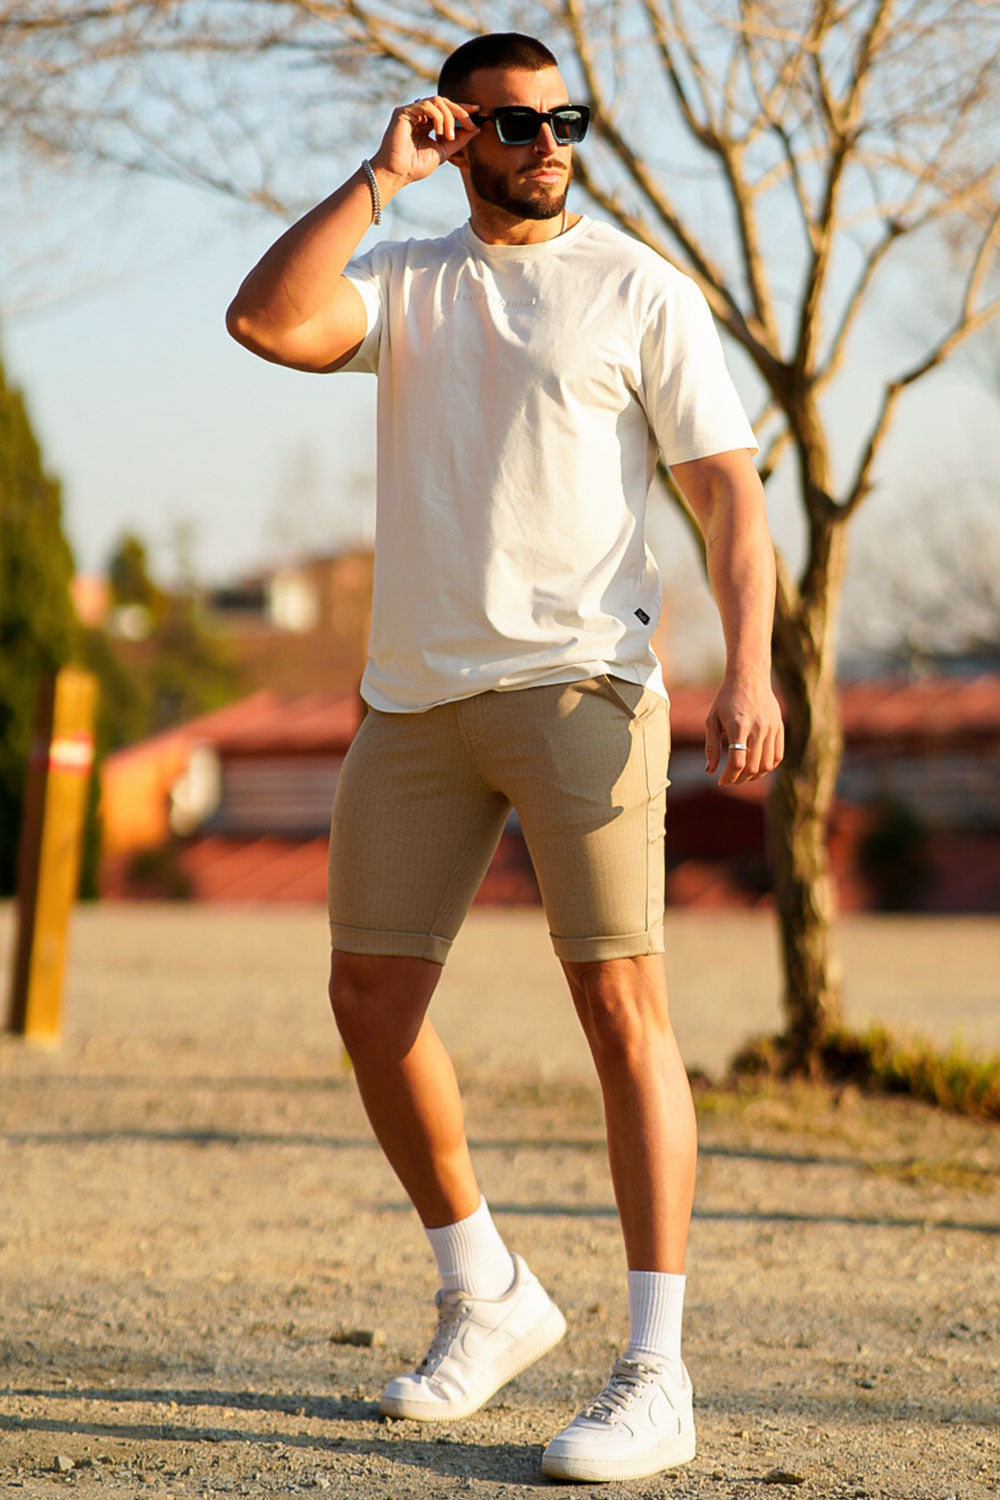 Gingtto Step Up Your Style Game With Our Premium Men's Chino Shorts